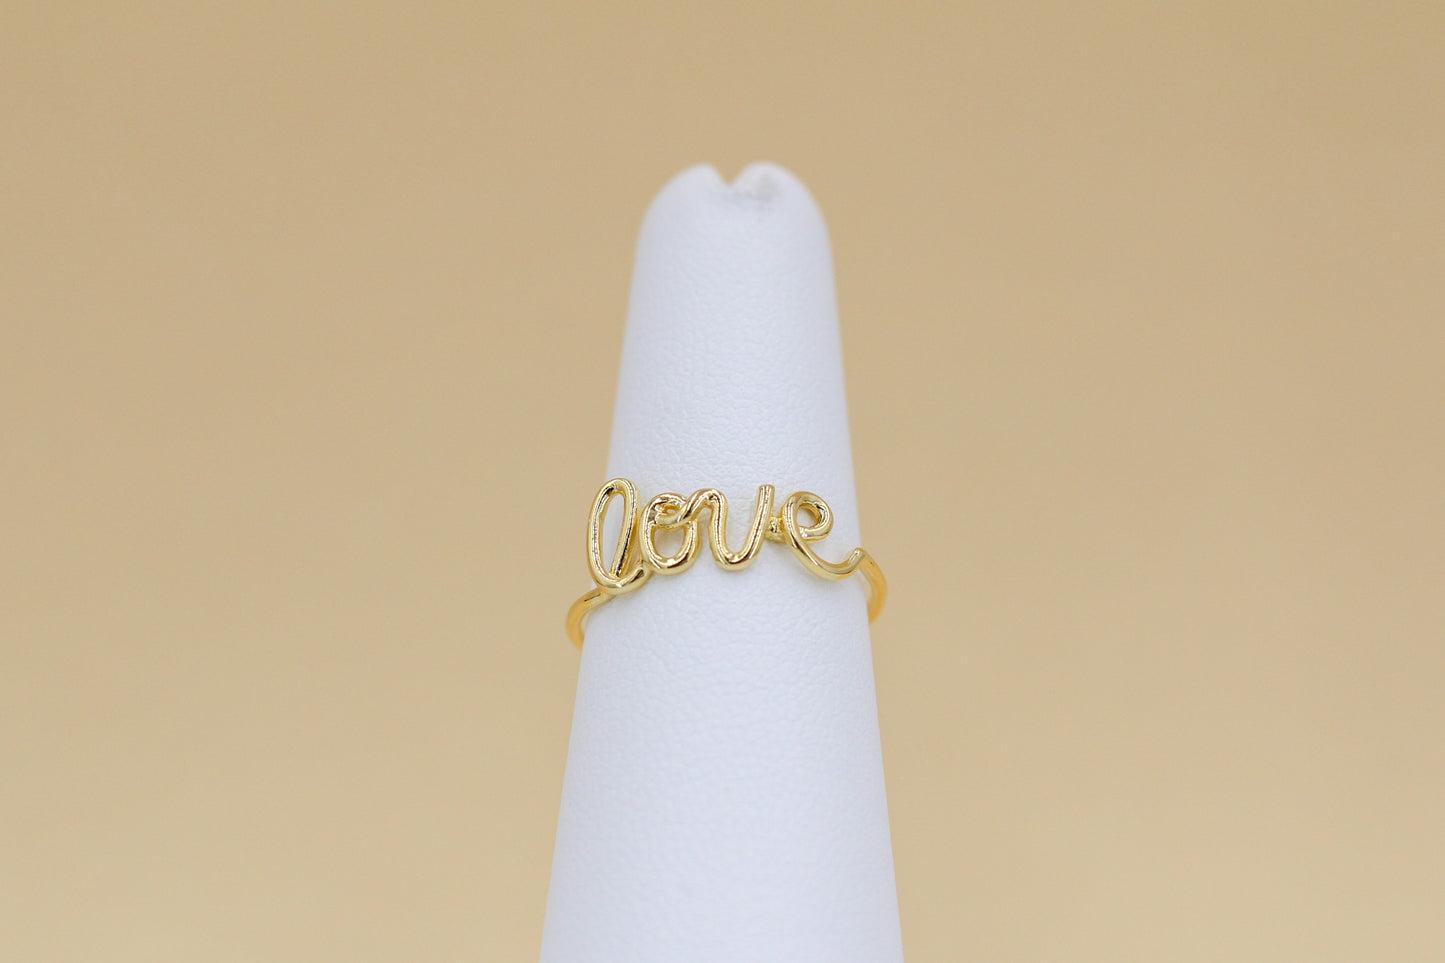 The Gold Love Ring